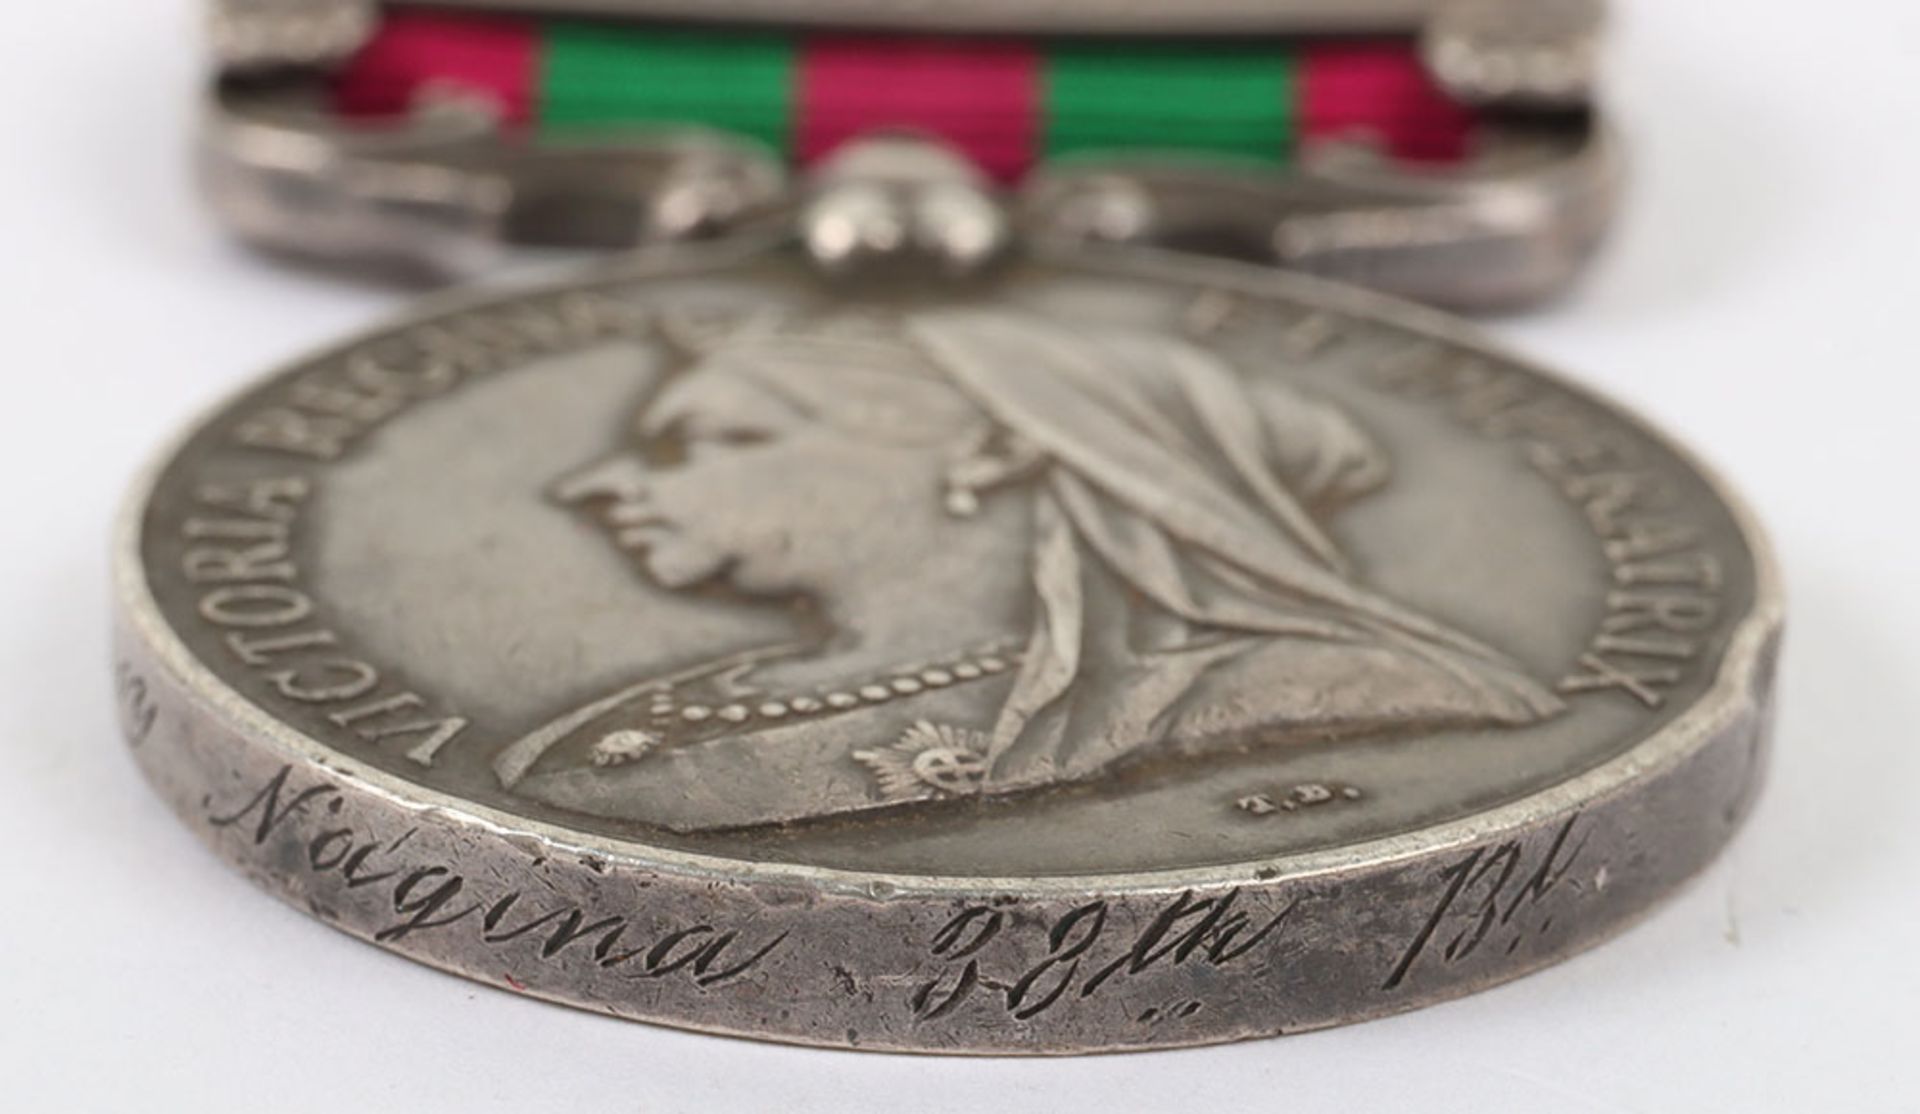 Victorian Indian General Service Medal 1895-1902 38th Bengal Infantry, Indian Army - Image 5 of 7